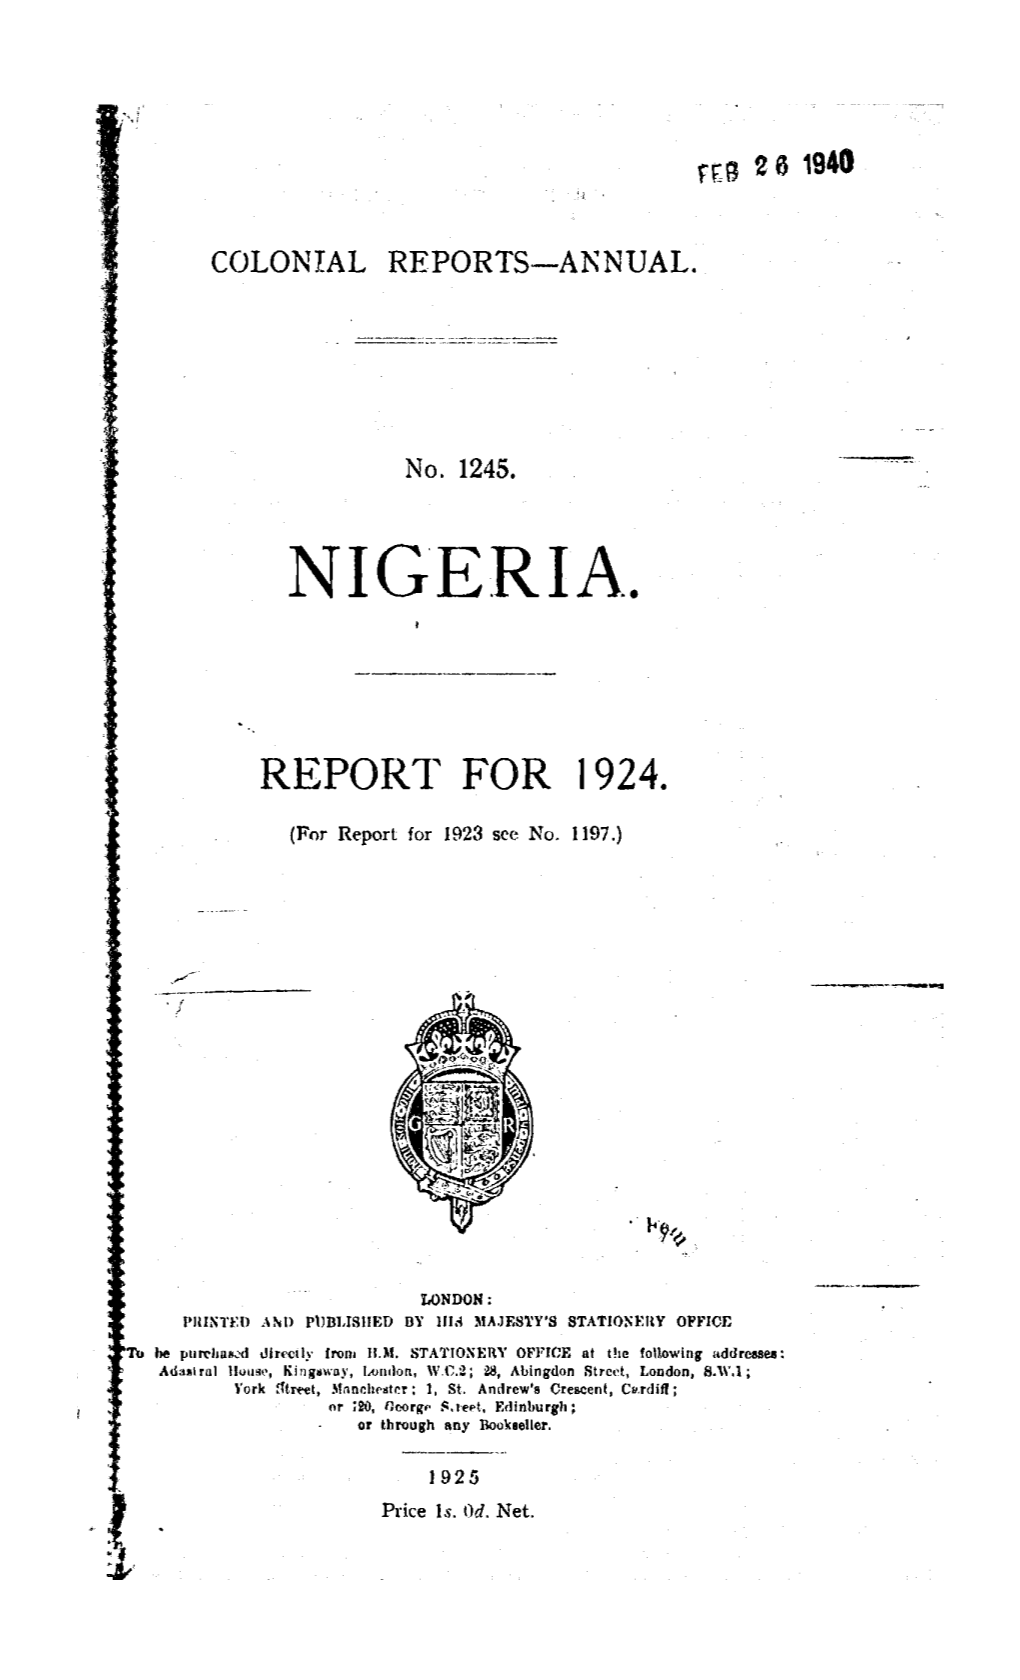 Annual Report of the Colonies, Nigeria, 1924